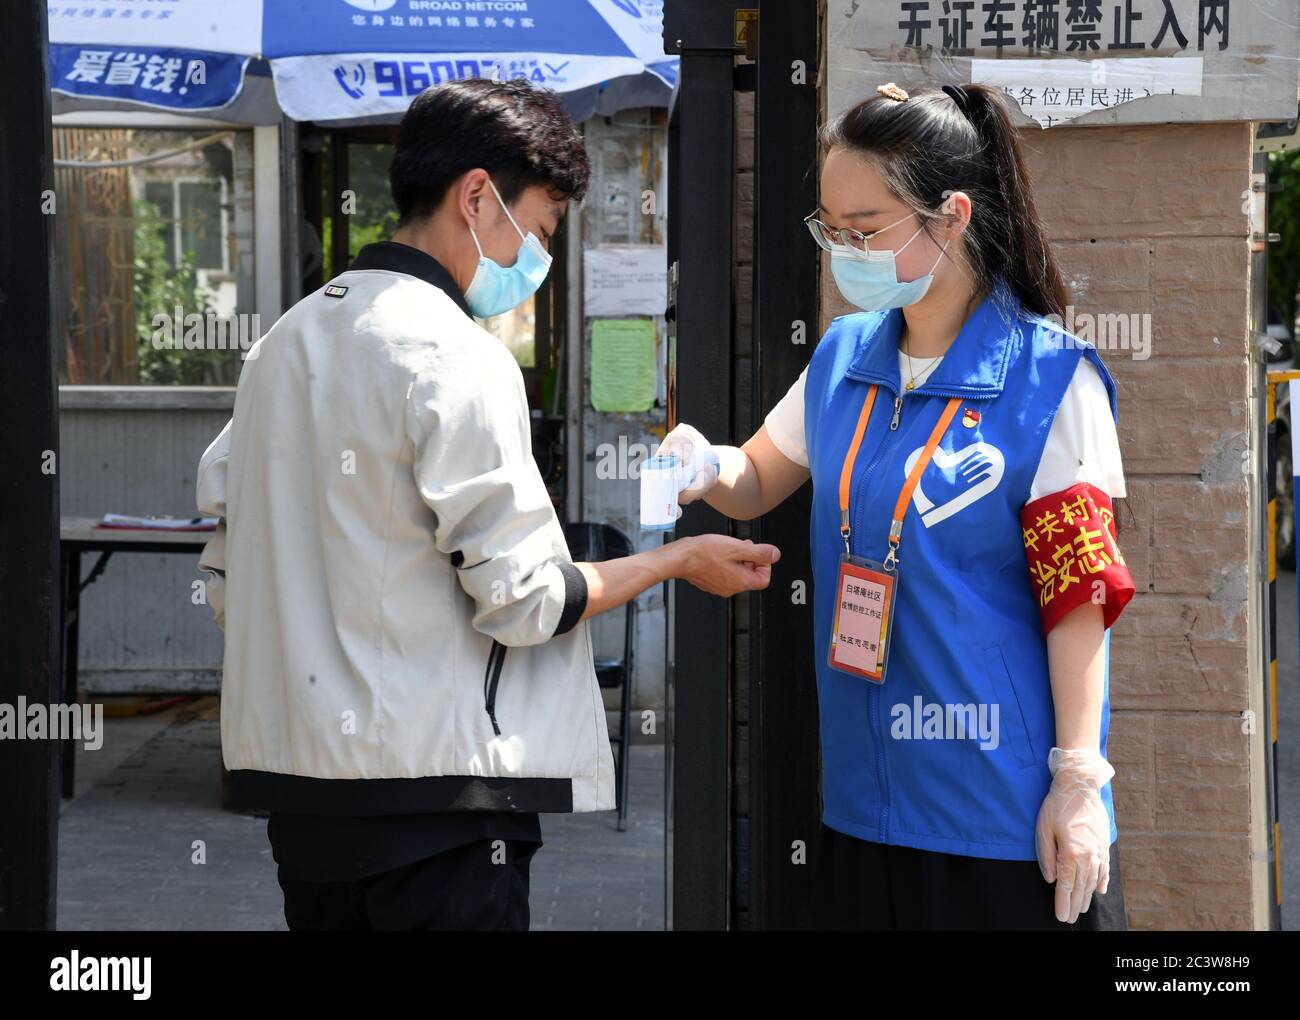 Beijing, China. 16th June, 2020. Volunteer Wang Yue (R) checks a resident's body temperature at the entrance of a community in Haidian District in Beijing, capital of China, June 16, 2020. Credit: Ren Chao/Xinhua/Alamy Live News Stock Photo